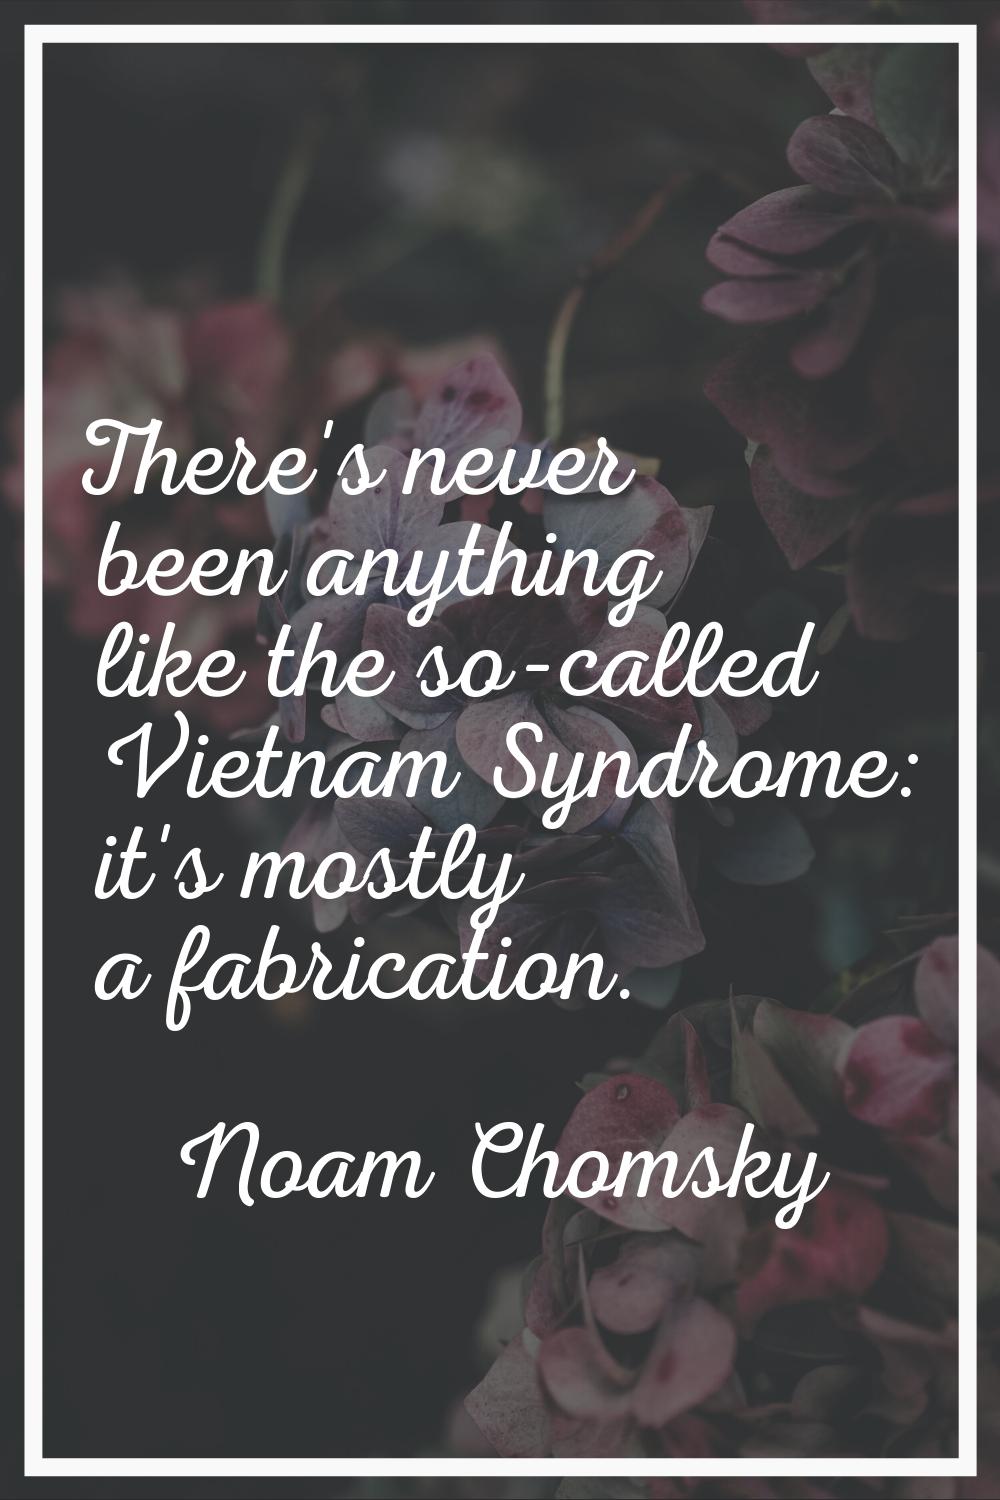 There's never been anything like the so-called Vietnam Syndrome: it's mostly a fabrication.